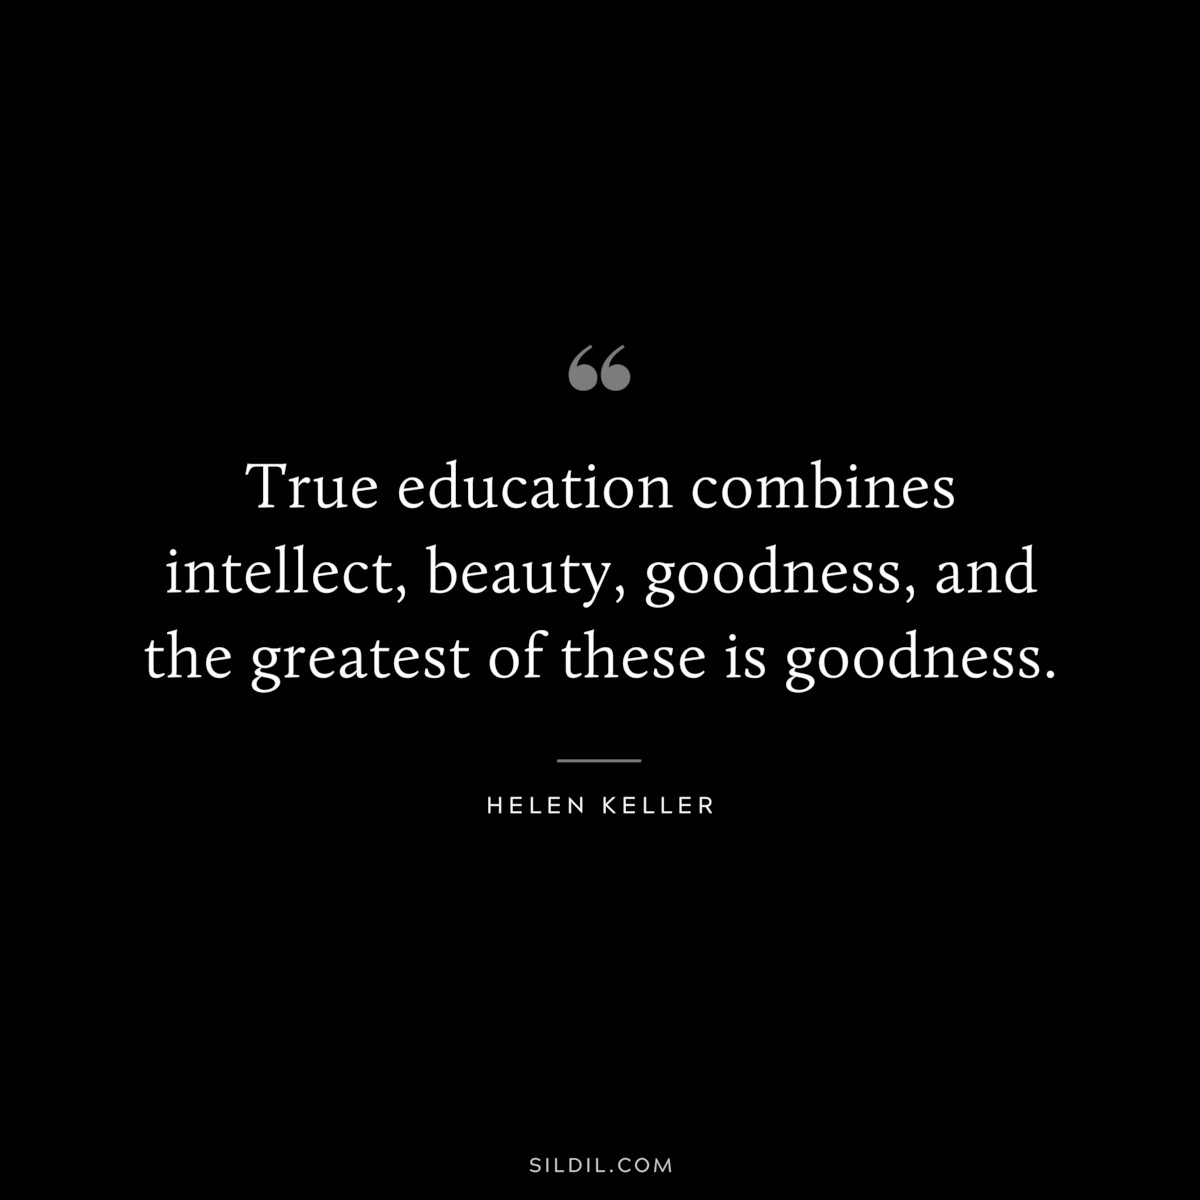 True education combines intellect, beauty, goodness, and the greatest of these is goodness. ― Helen Keller